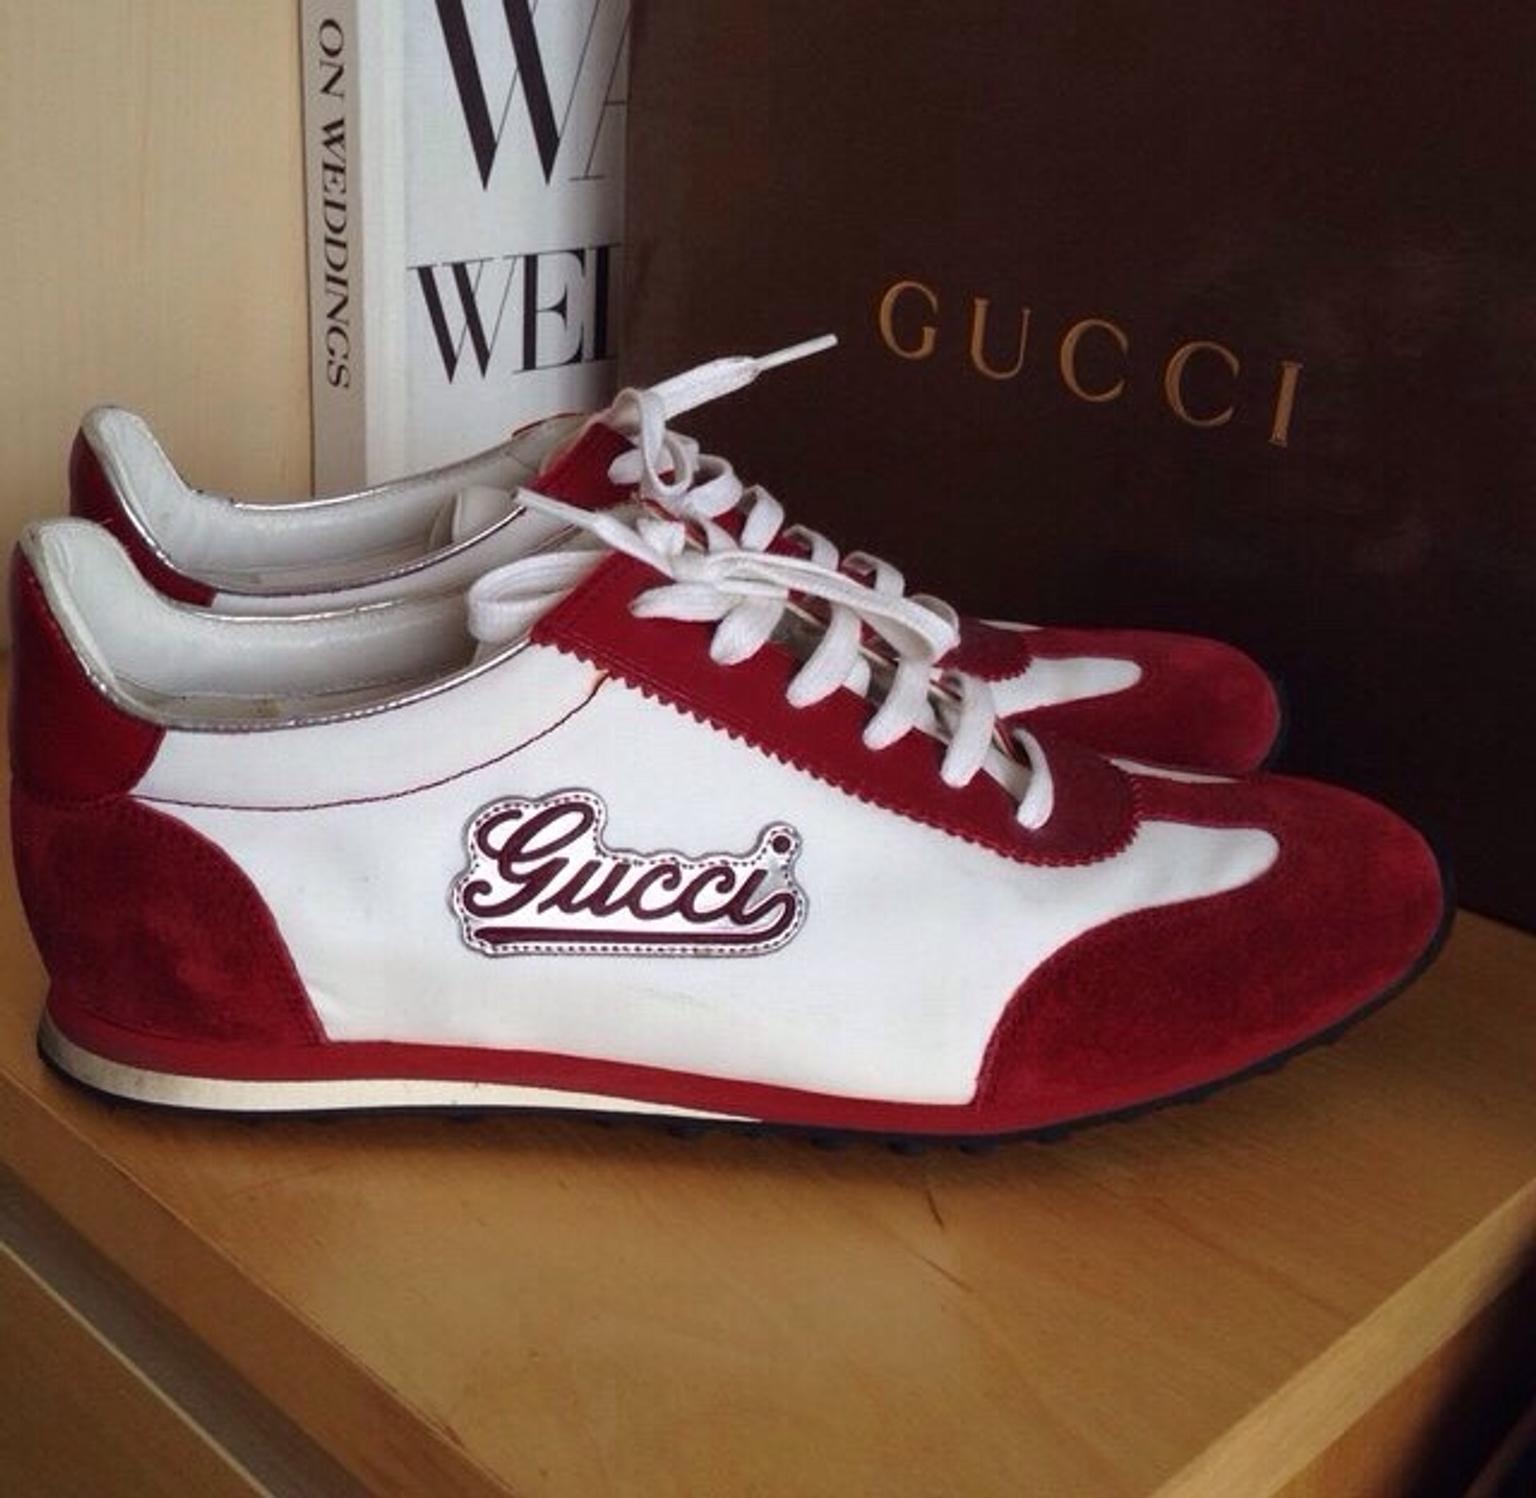 REDUCED Gucci trainers in leather & suede in M3 Manchester for £130.00